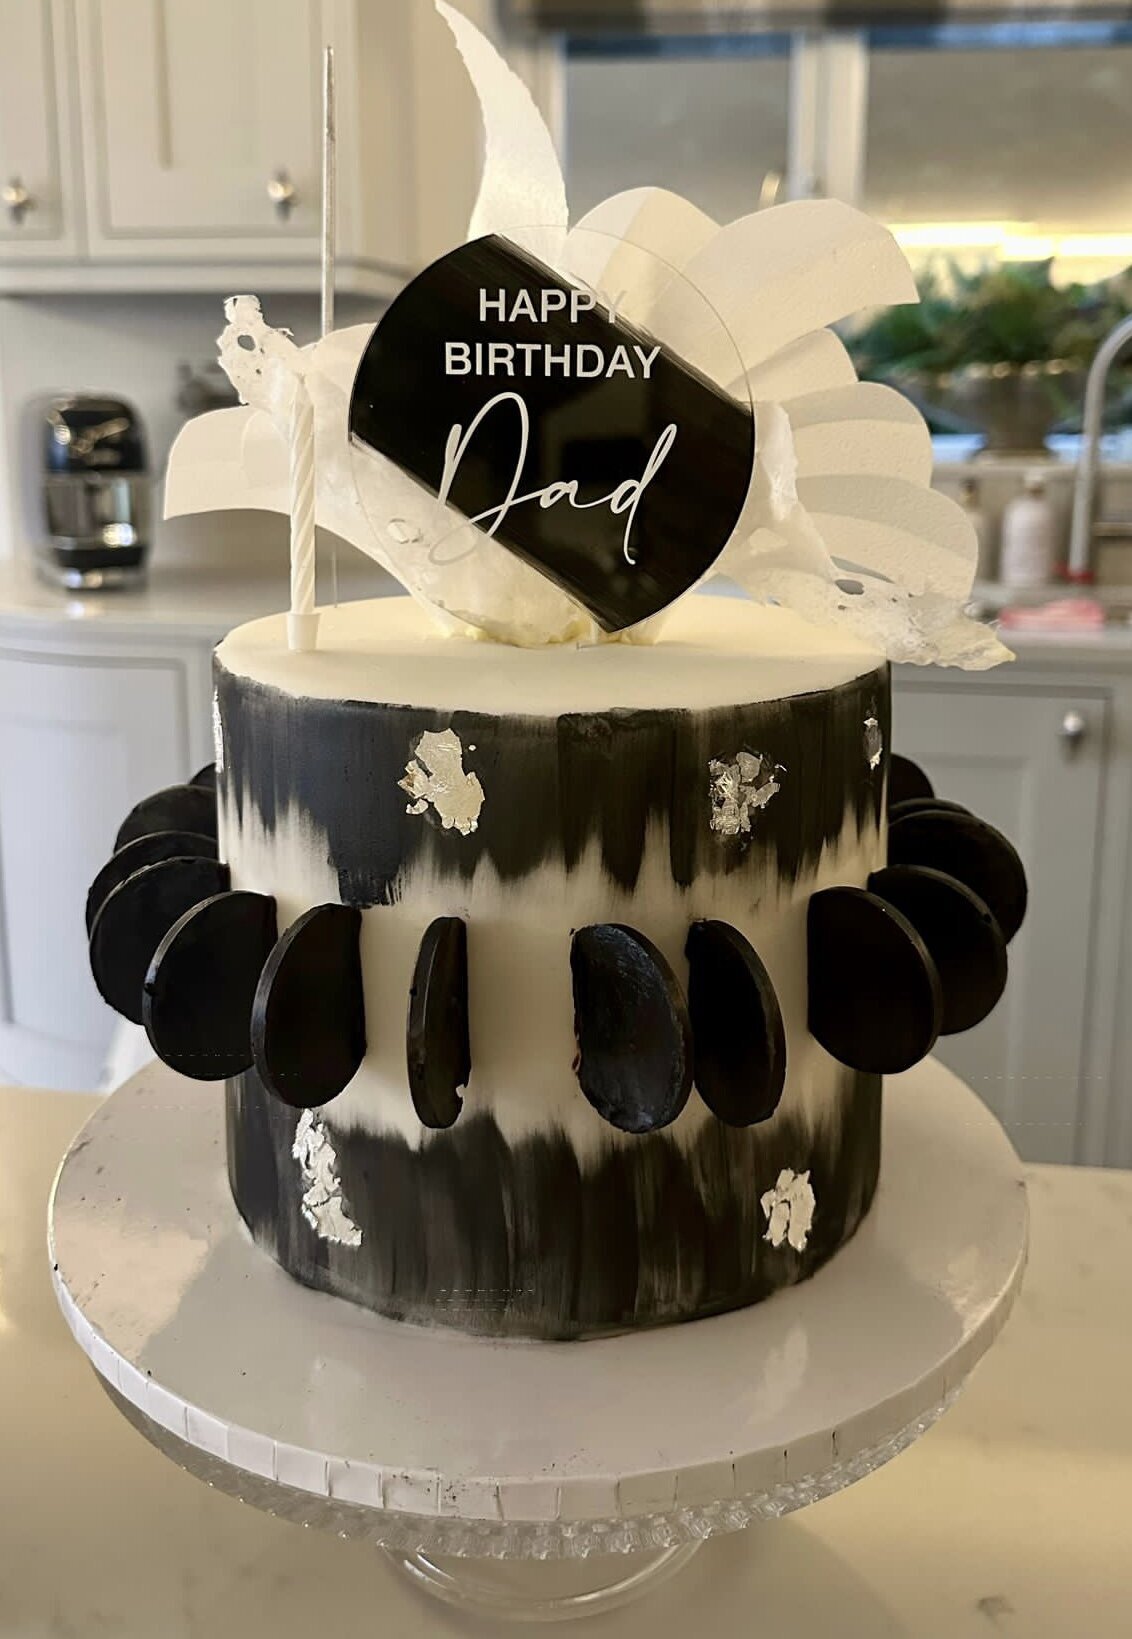 Egg free black and white birthday cake with handmade chocolate discs, wafer paper elements and edible silver.